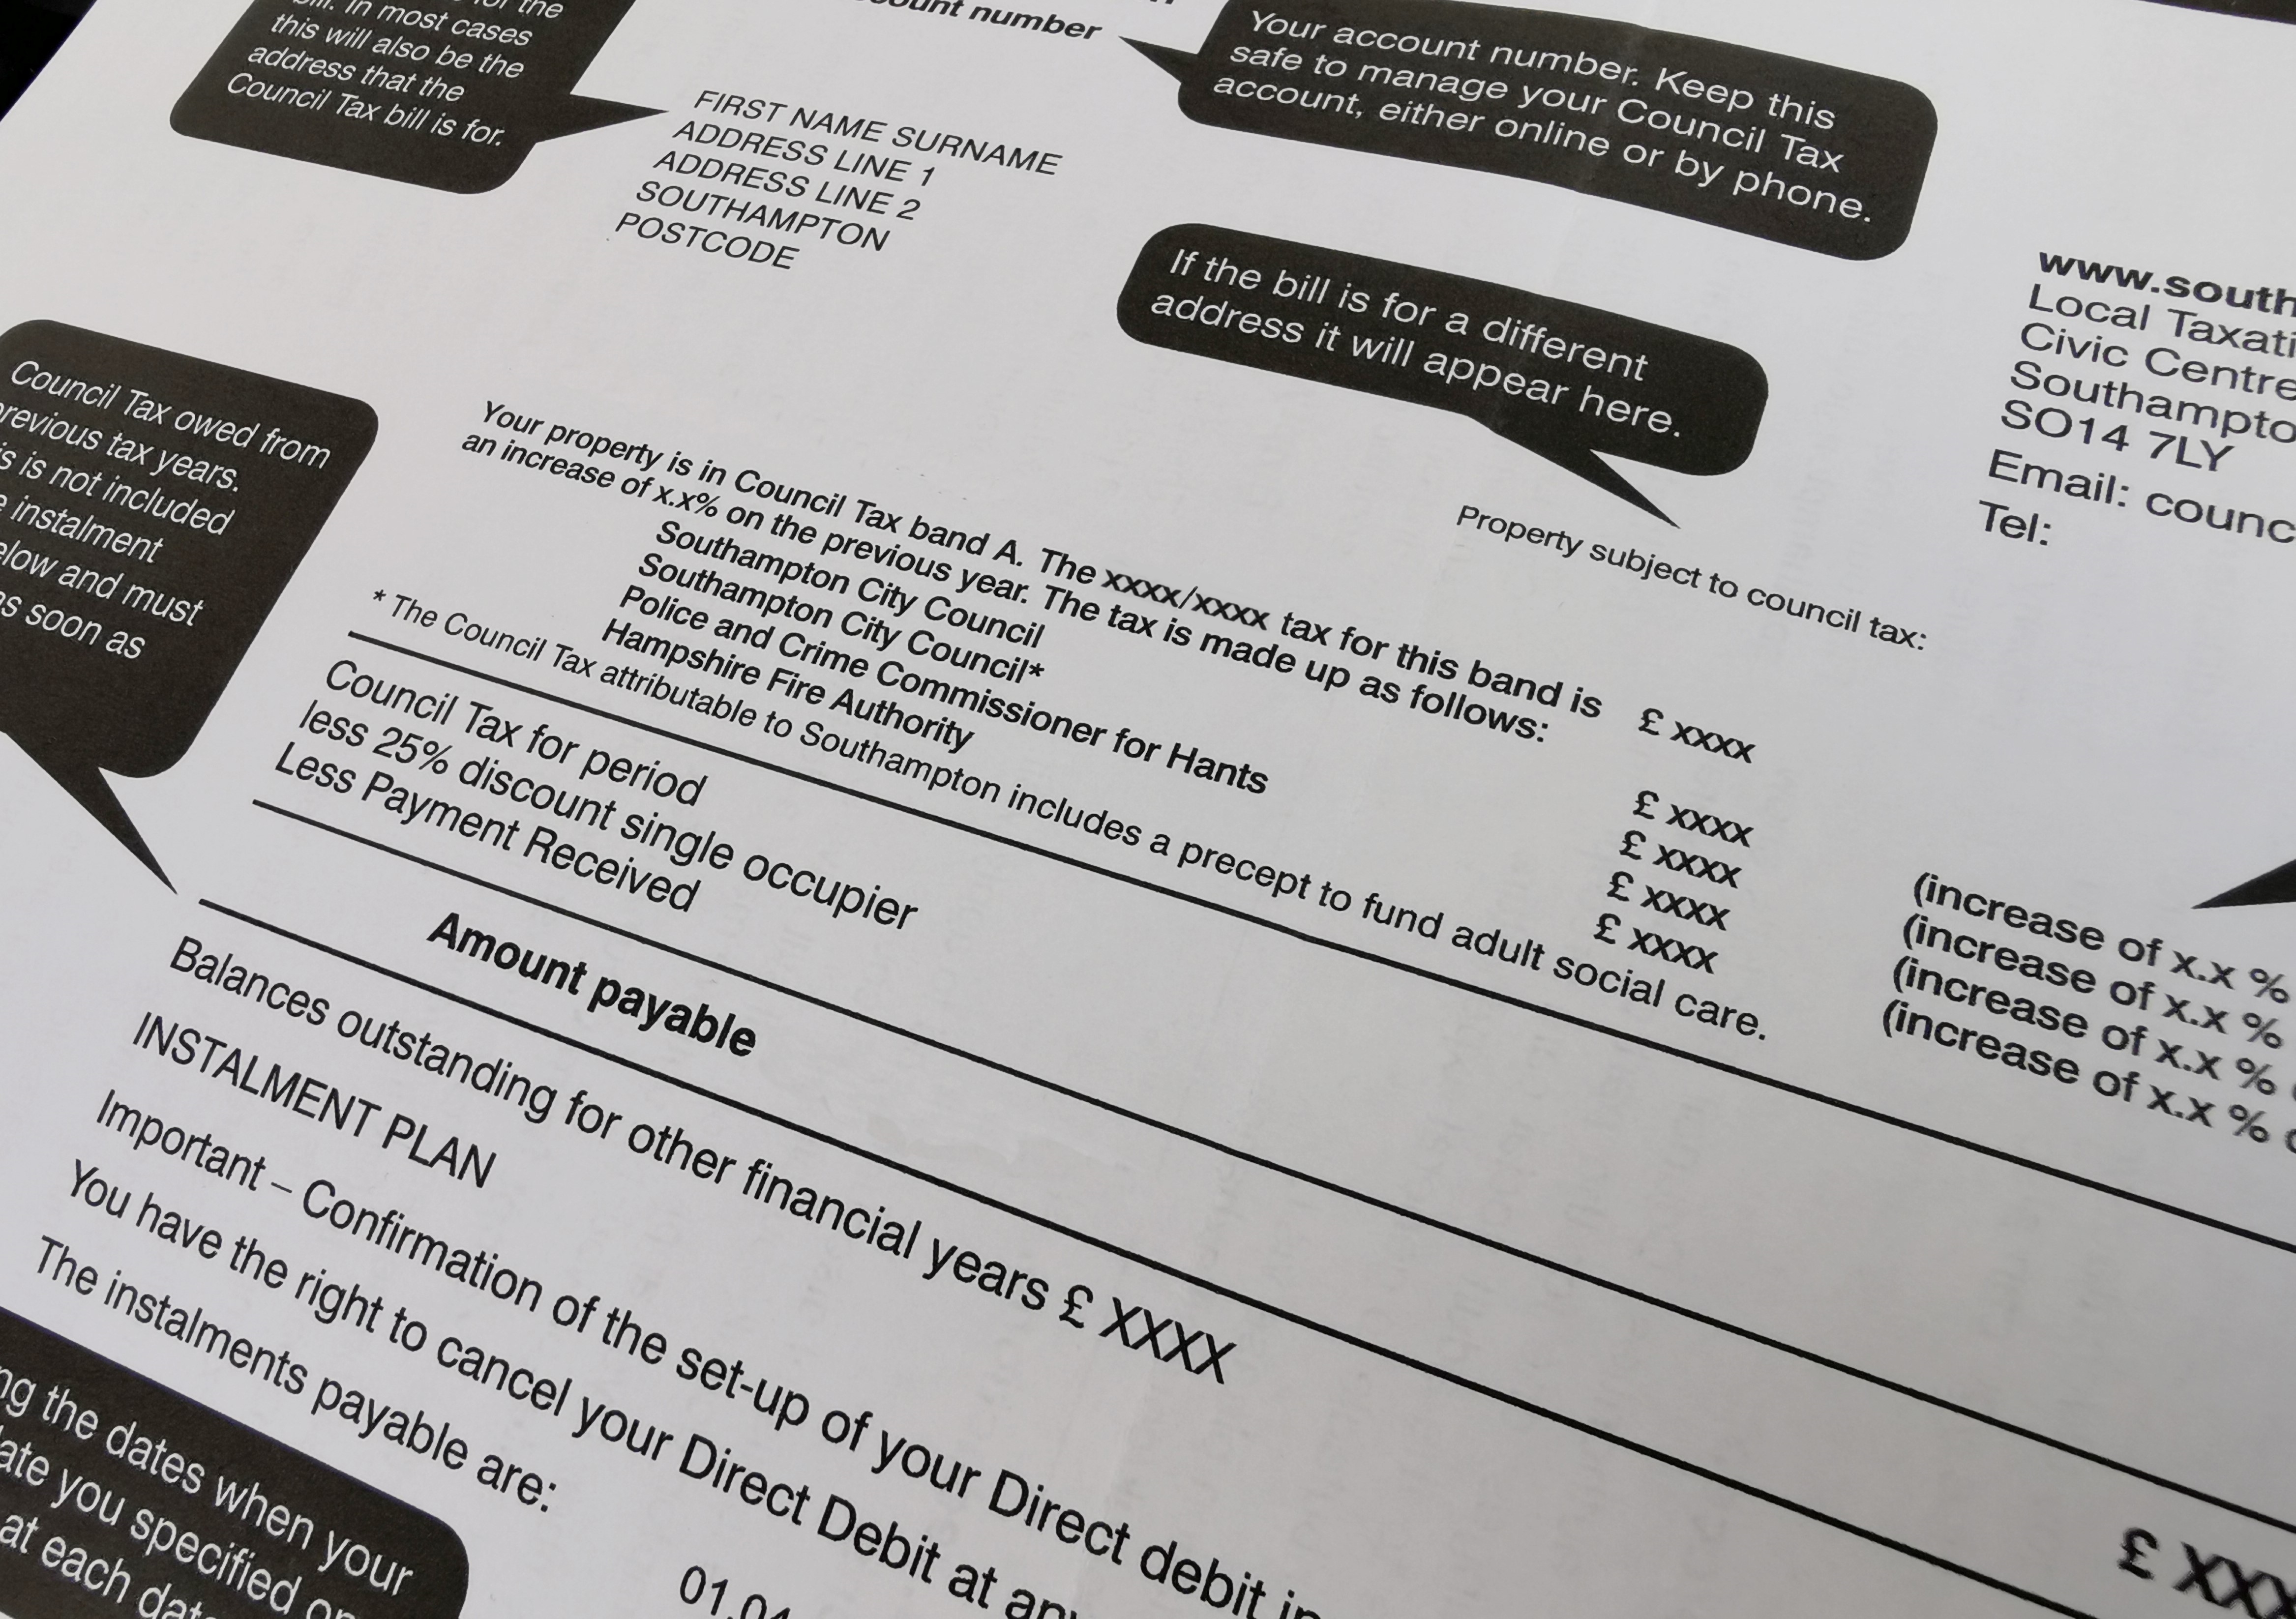 Council Tax bill explanation letter